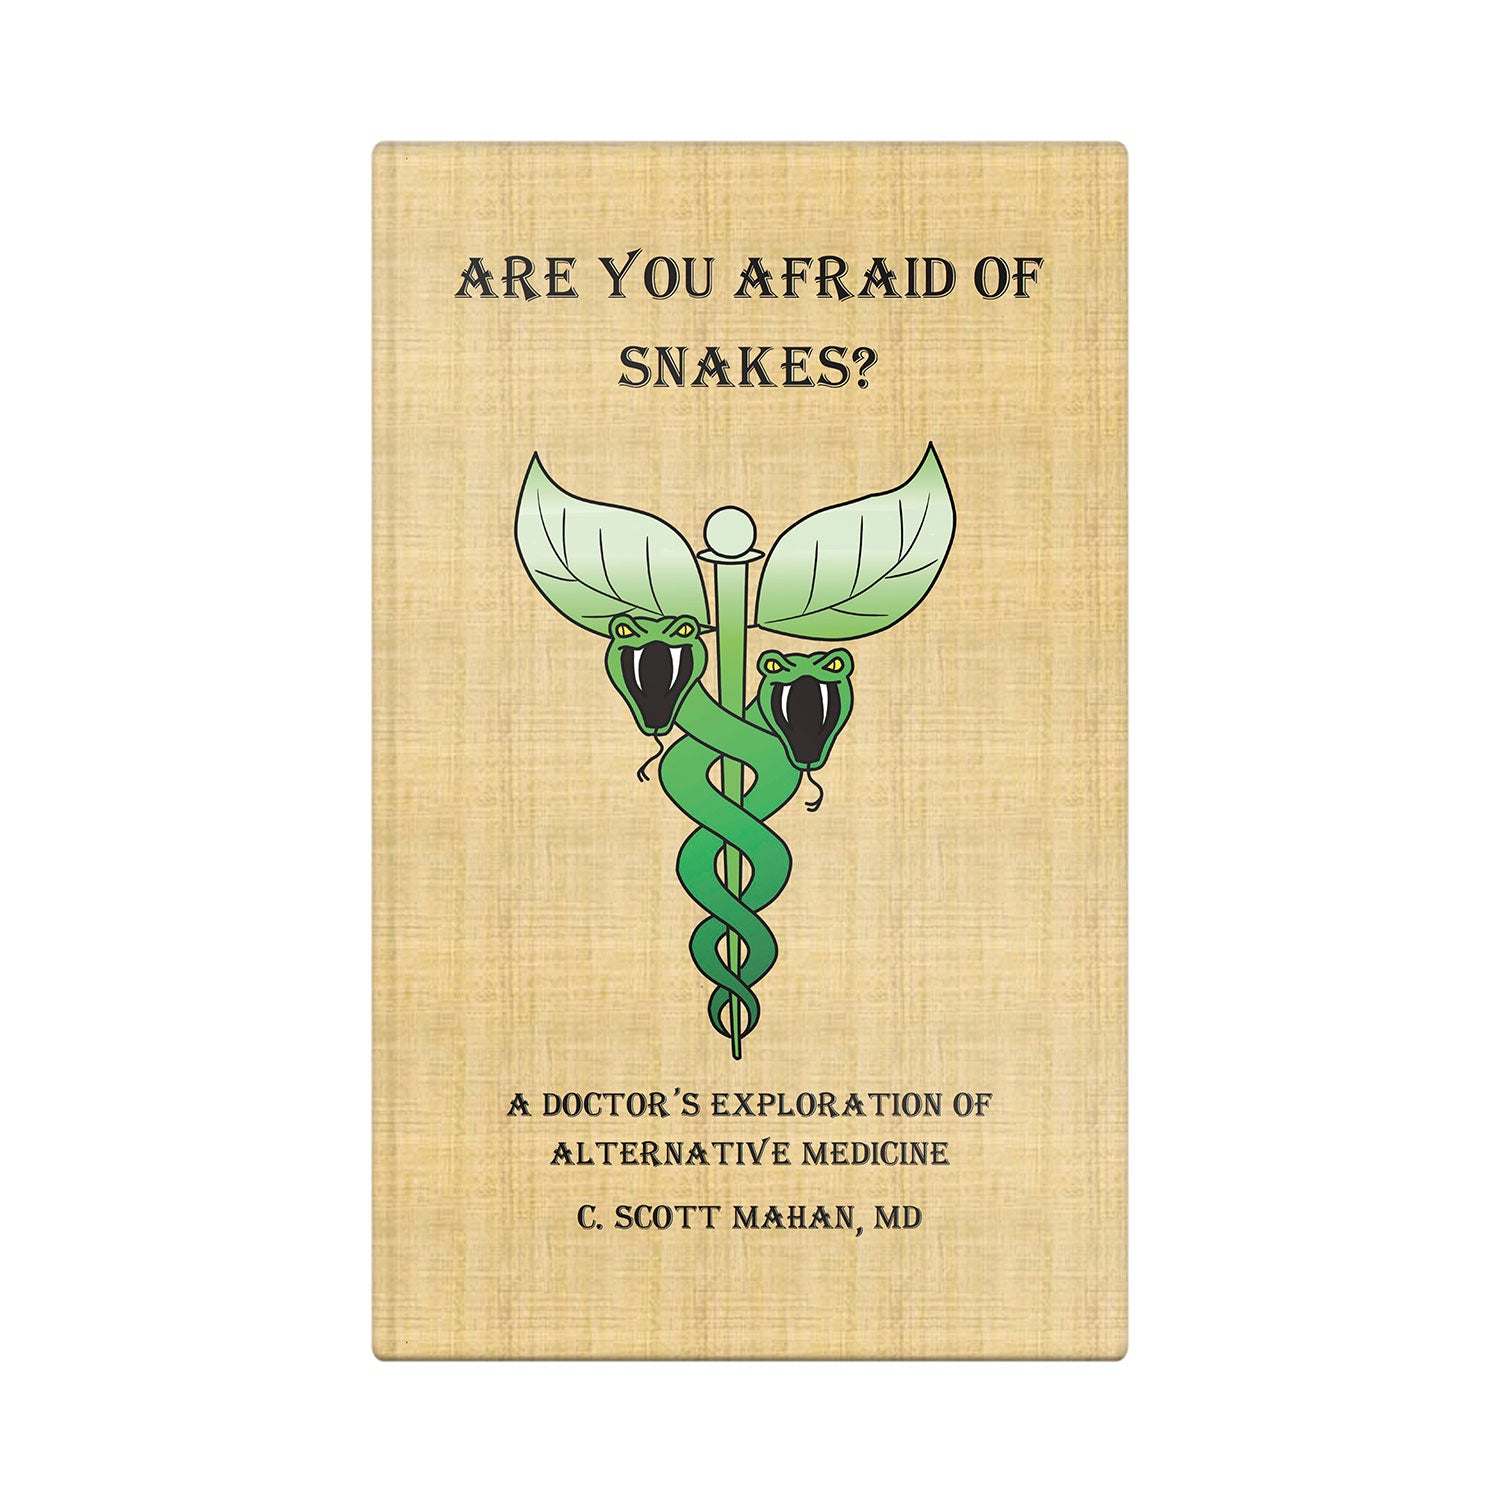 Are You Afraid of Snakes? A Doctor's Exploration of Alternative Medicine